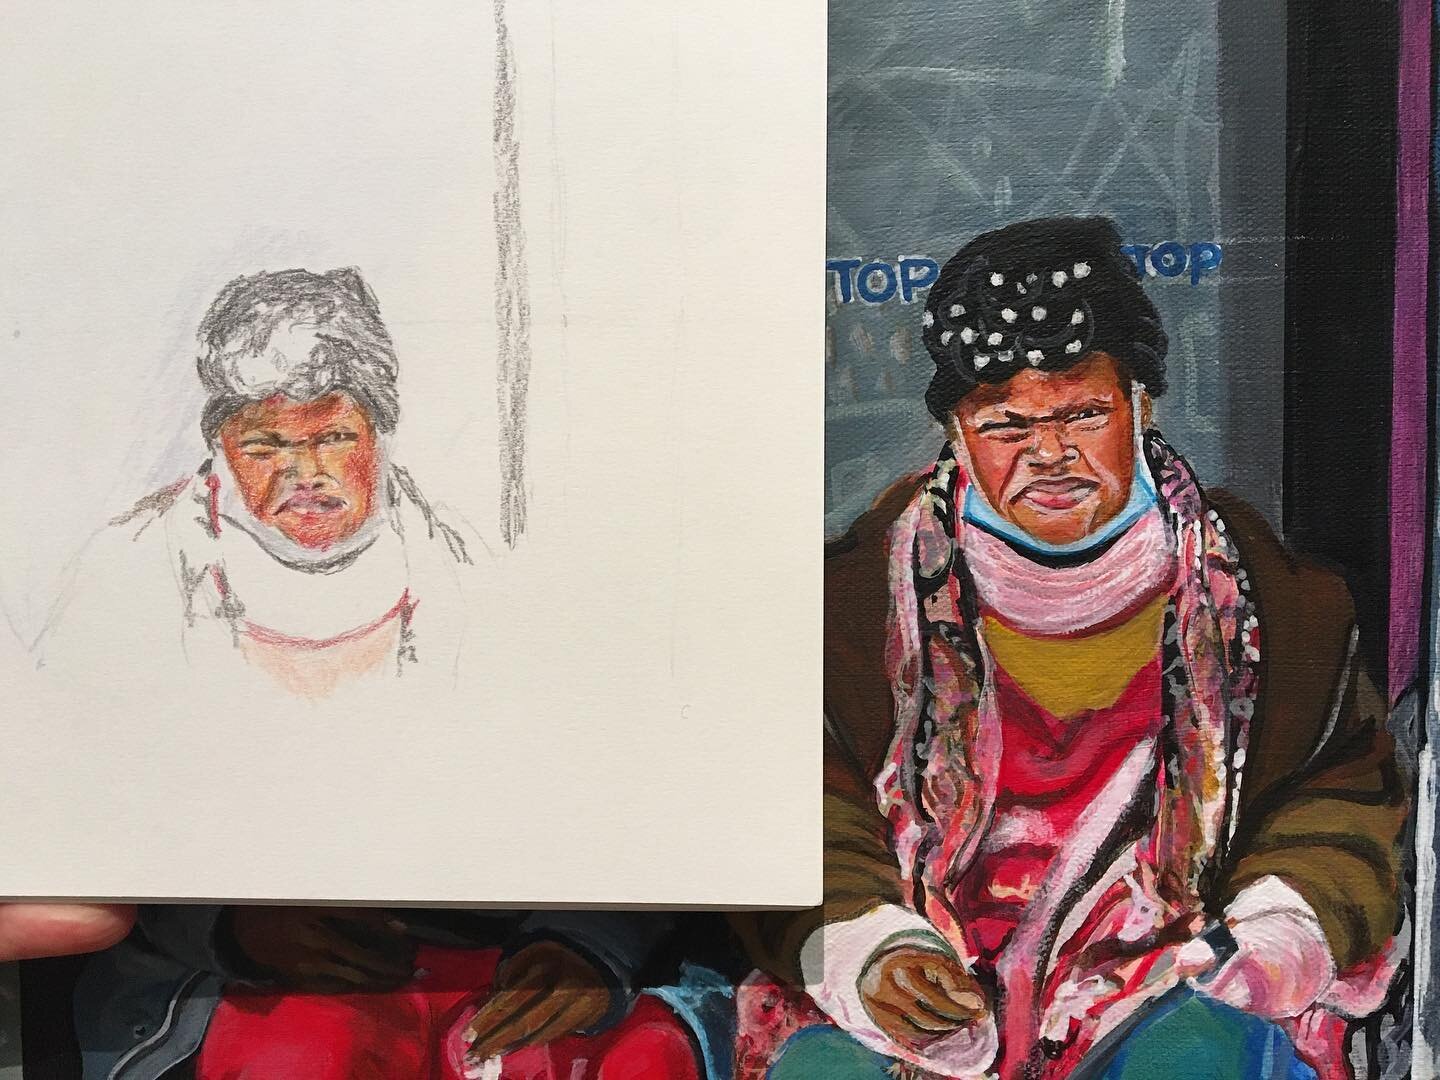 These are some of my students&rsquo; drawings from the @portlandartmuseum &lsquo;s Black Artists of Oregon exhibit. The show closes at the end of March, so get yourself down there if you haven&rsquo;t been yet. Teaching this PCC class that meets at t